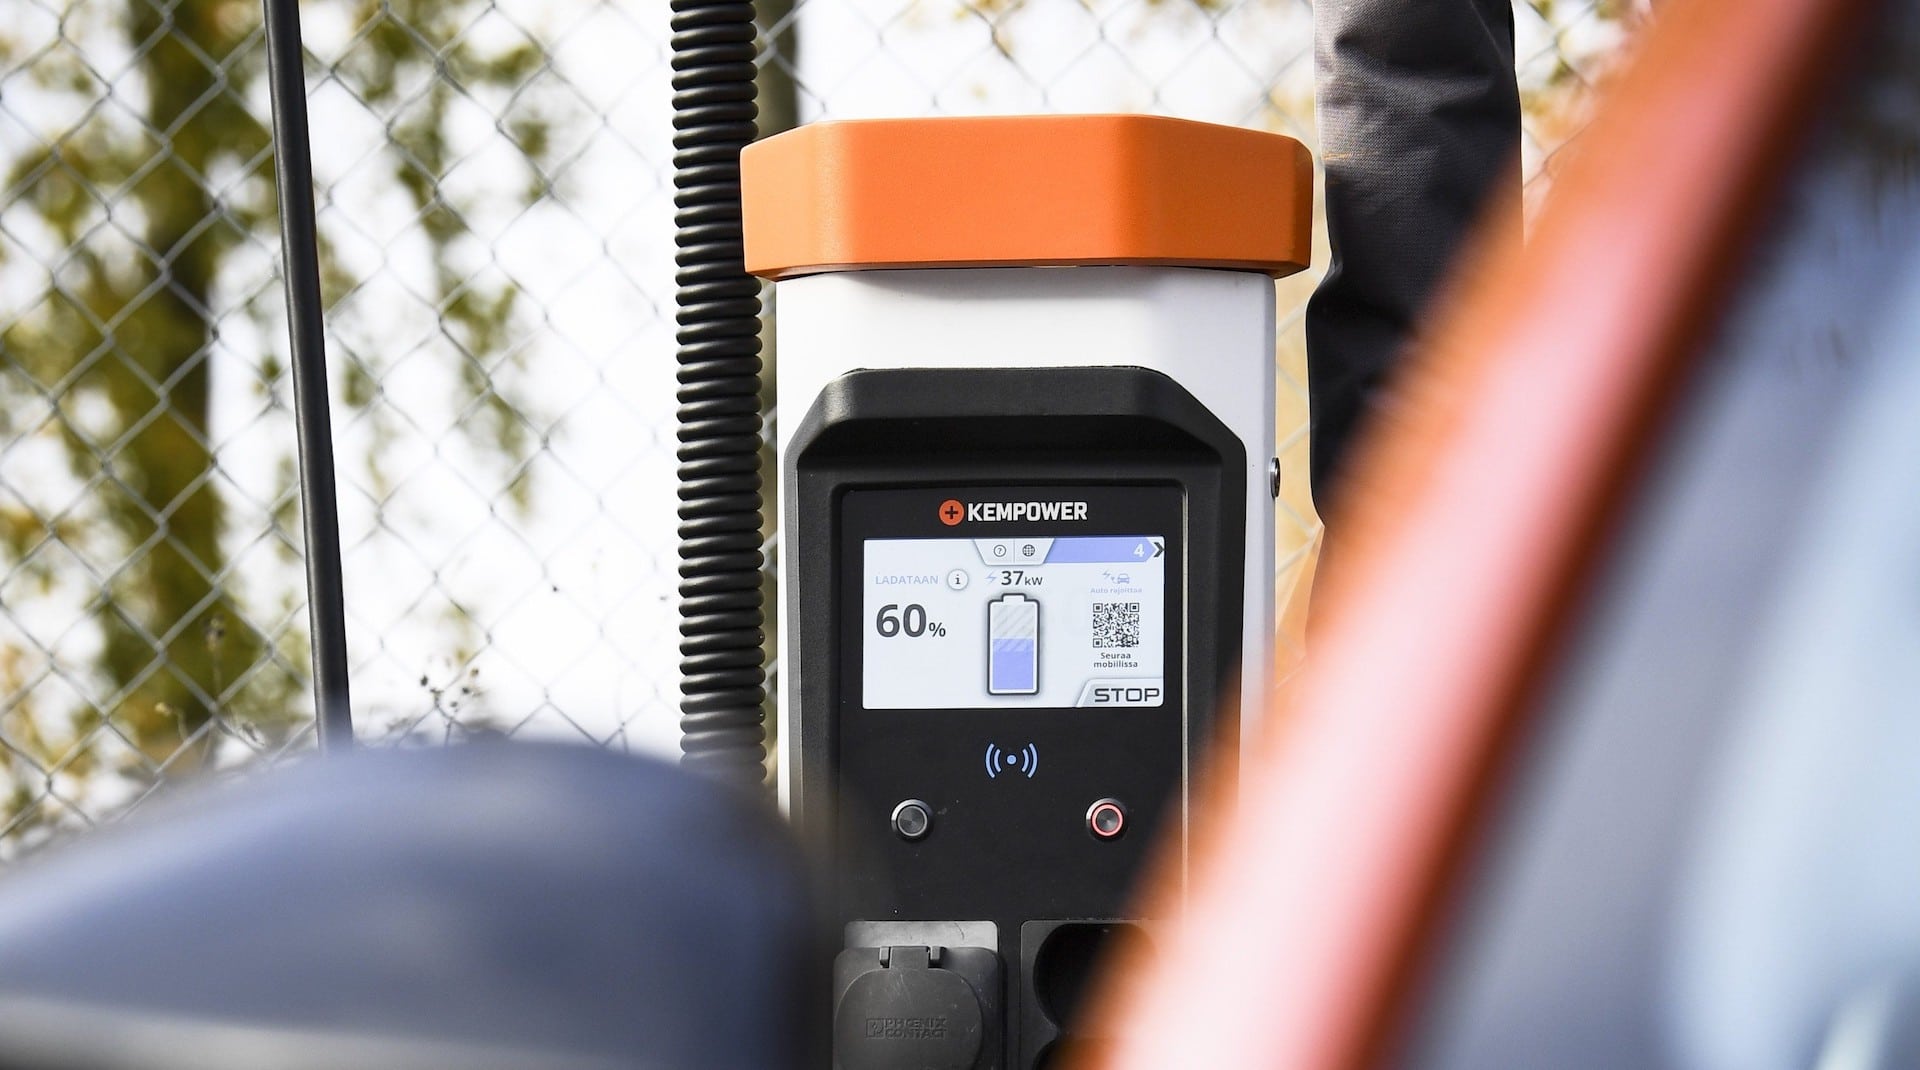 Kempower Launches Partnership With Gilbarco Veeder-Root to Offer EV Charging Solutions